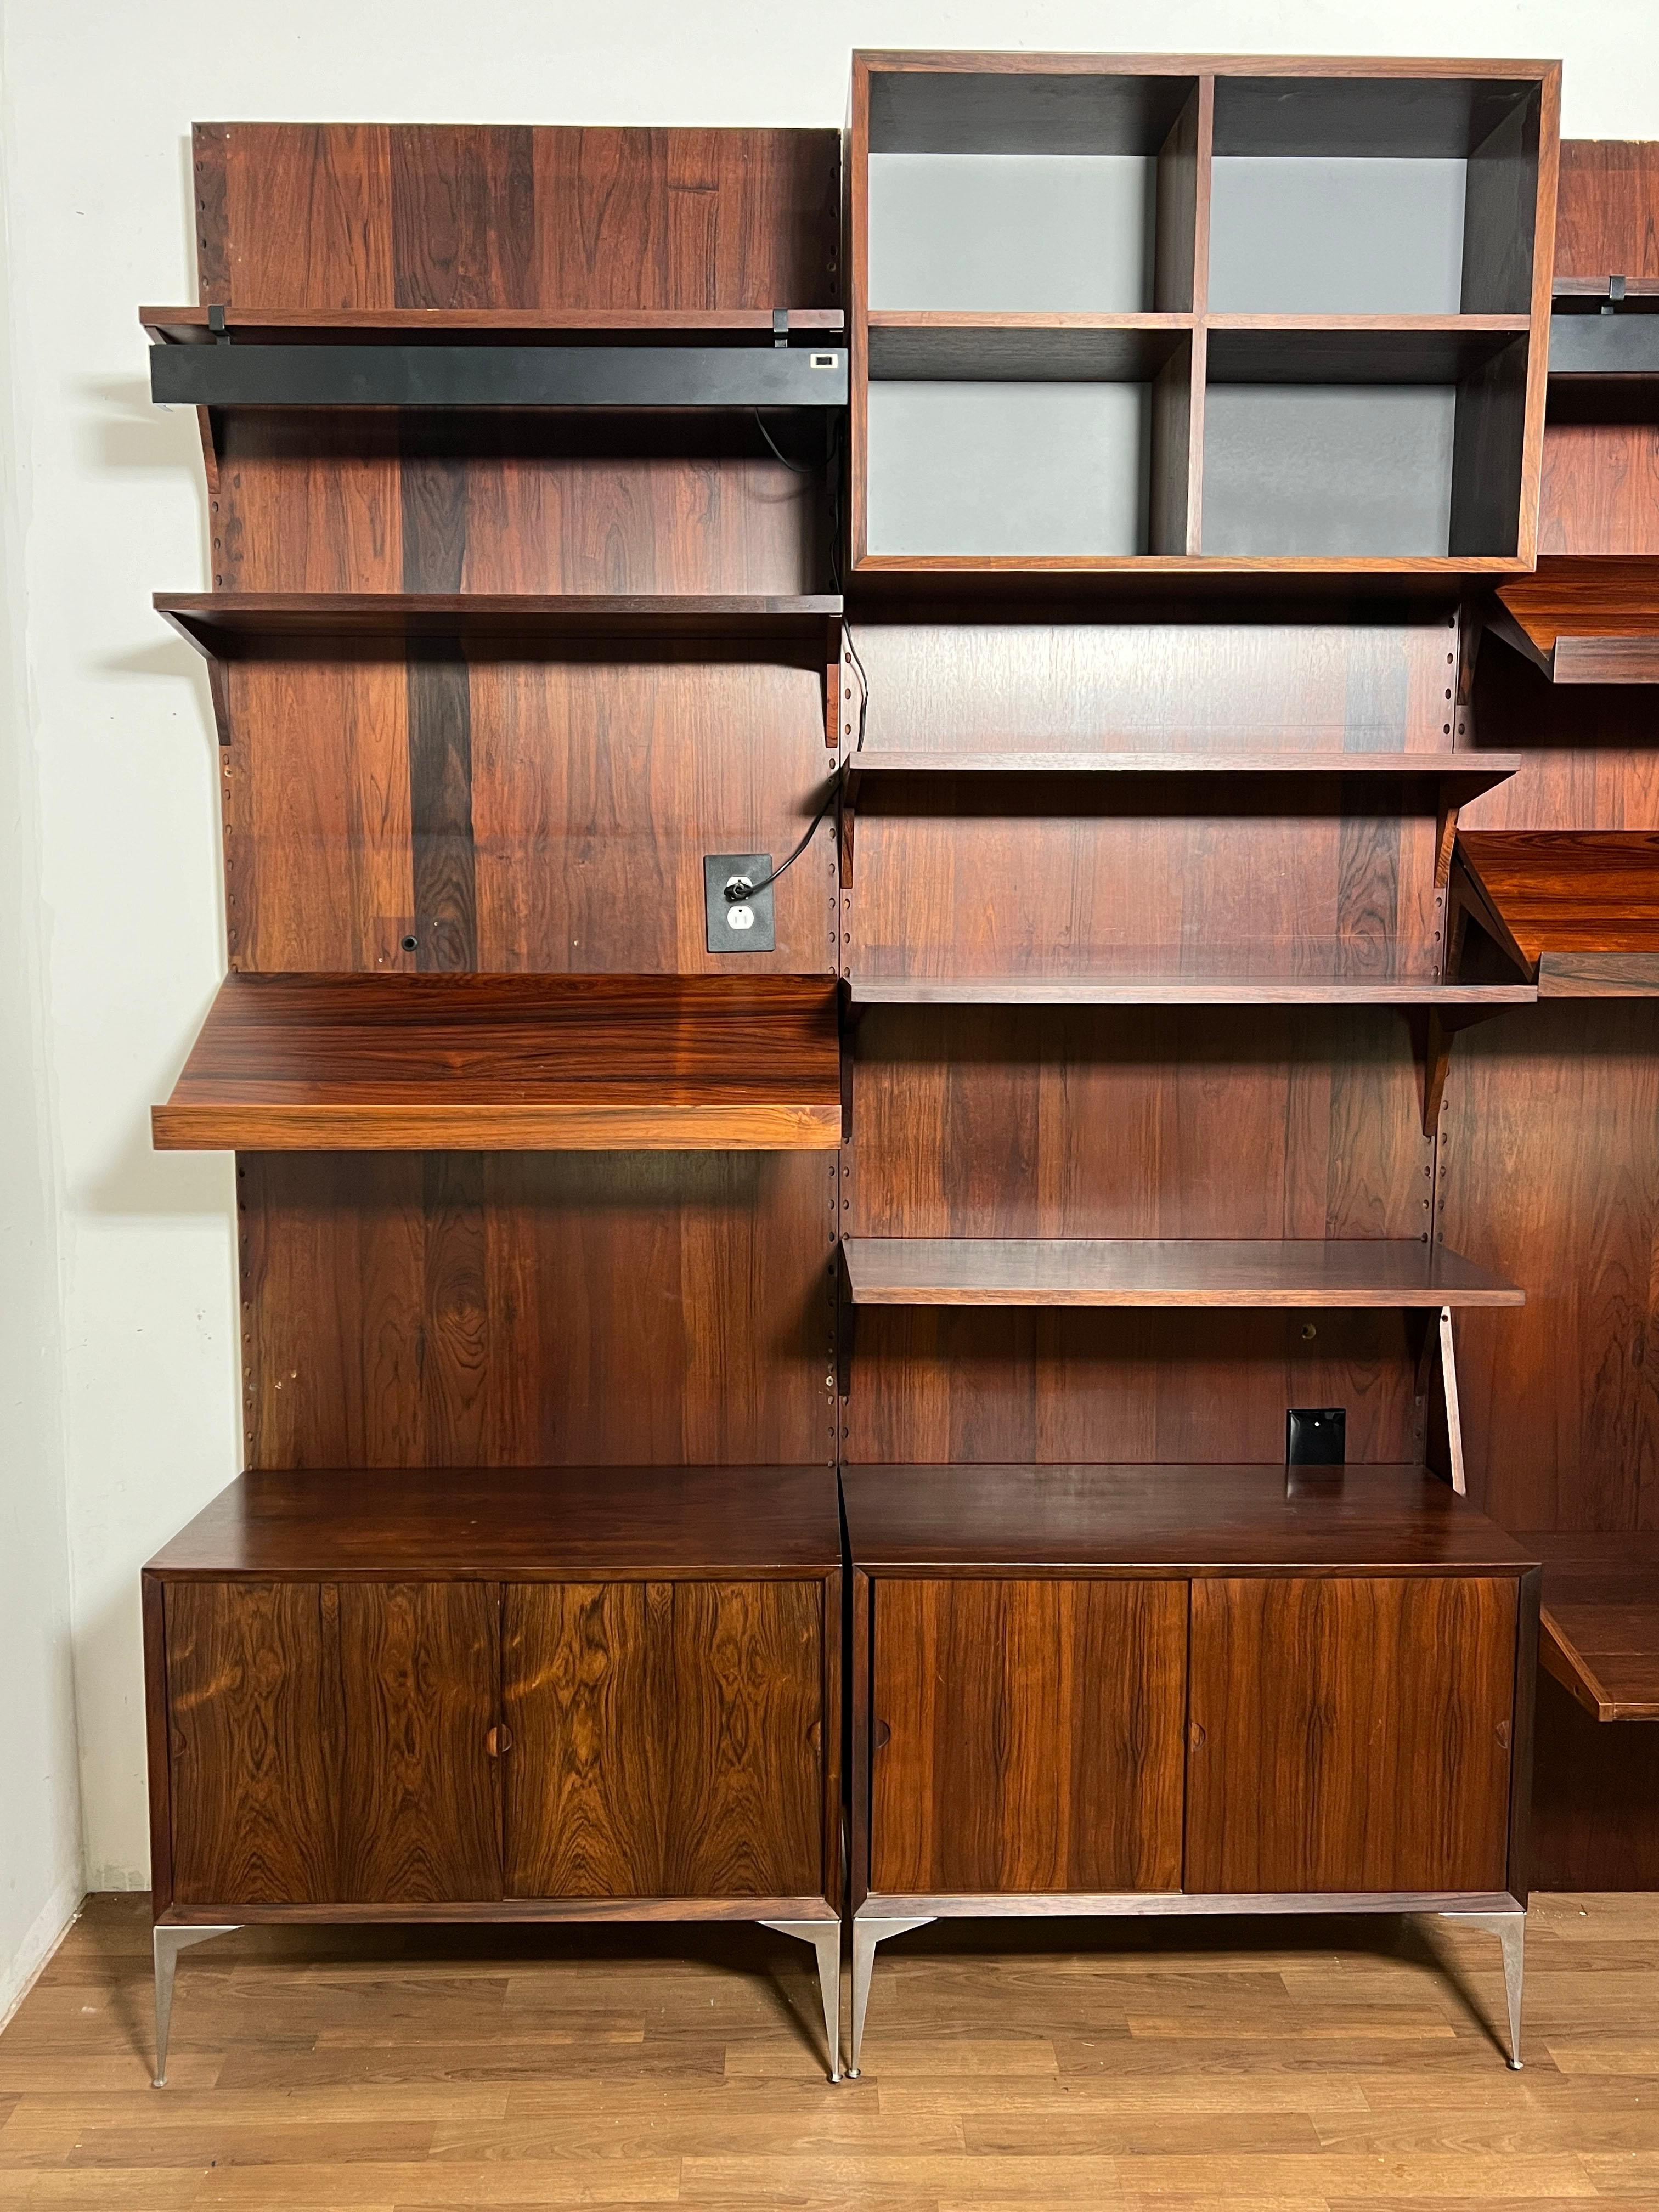 Royal System “Cado” four bay wall unit in rosewood, designed by Poul Cadovius circa 1960s, Denmark. Purchased by prior owner in 1973. It features floor to ceiling wall panels, floor cabinets and numerous shelving options including a television